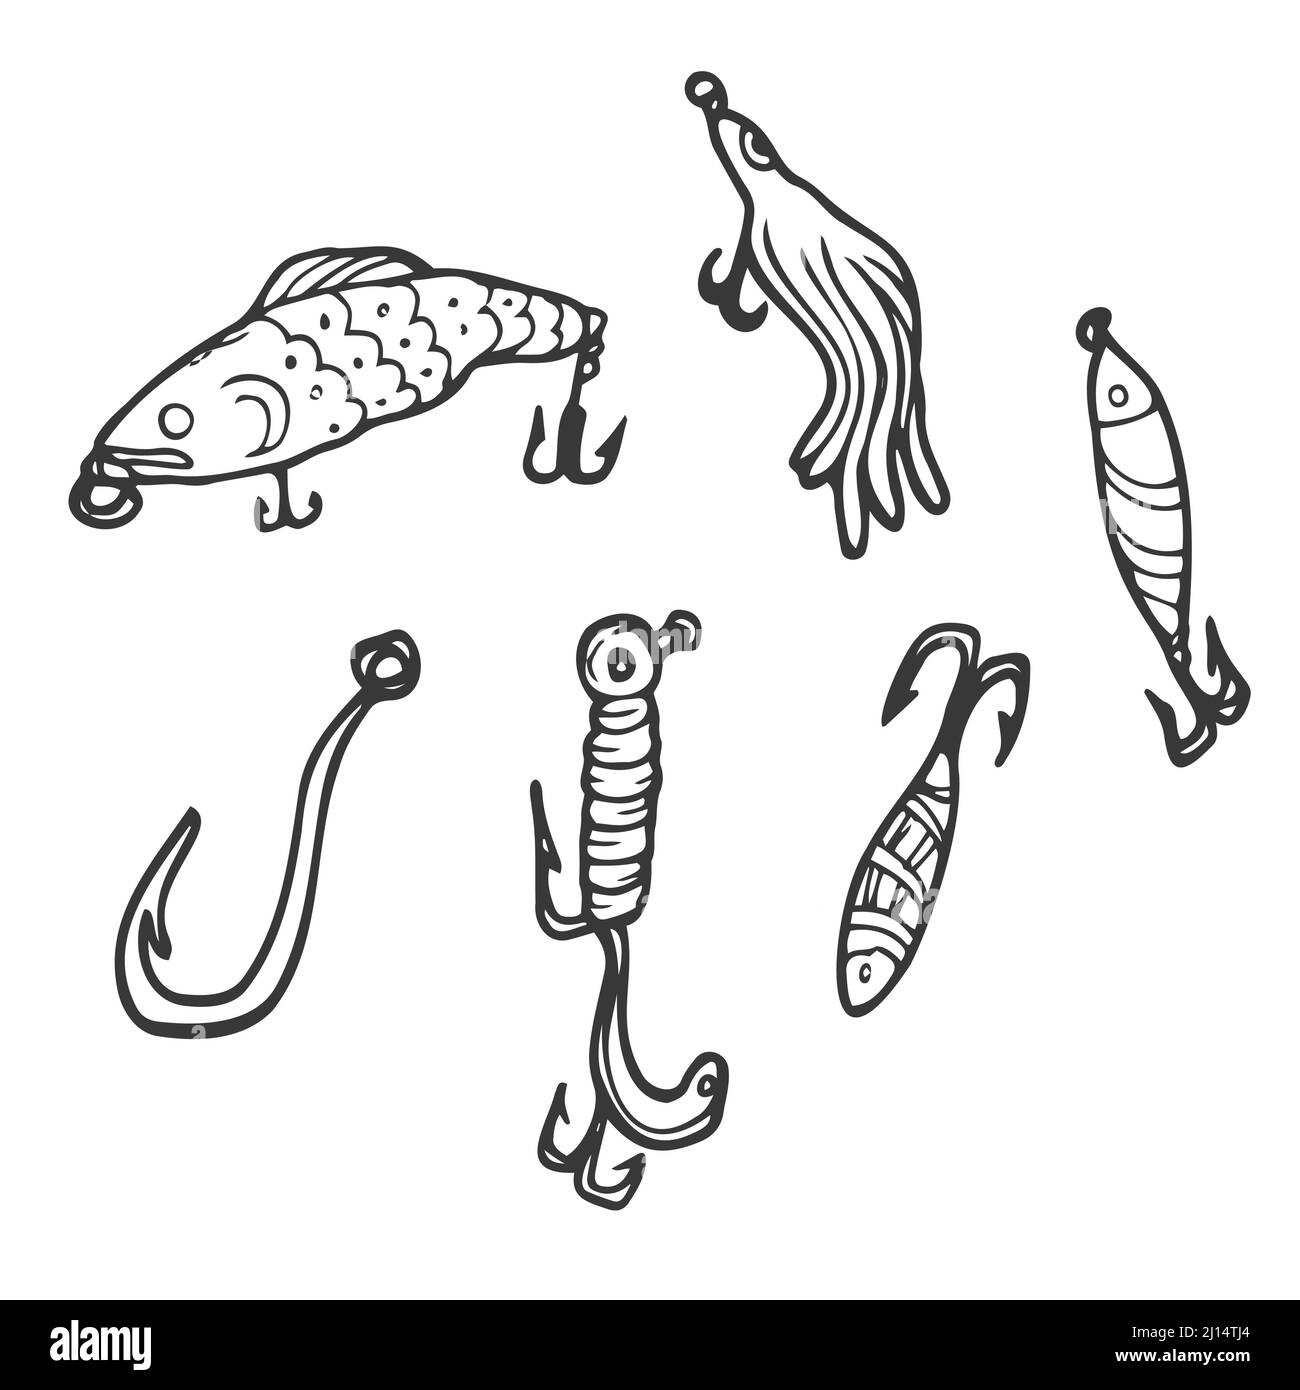 Fish hooks drawing Black and White Stock Photos & Images - Alamy